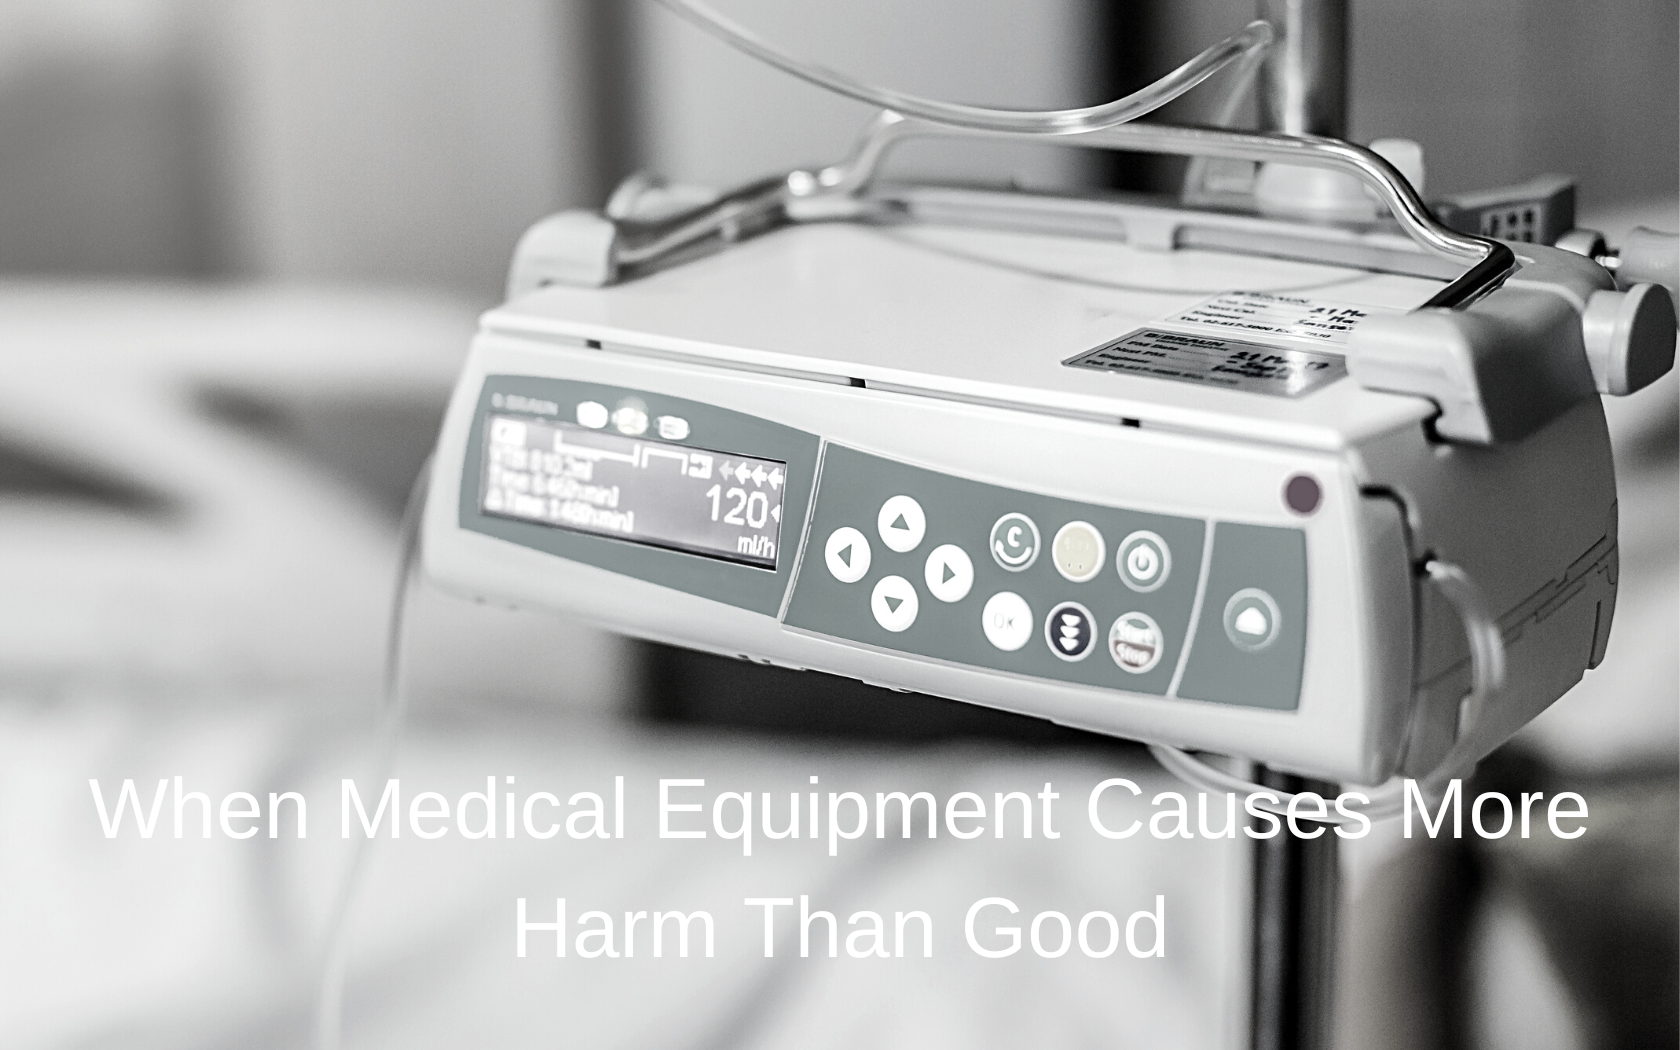 Faulty equipment can lead to medical device lawsuits .